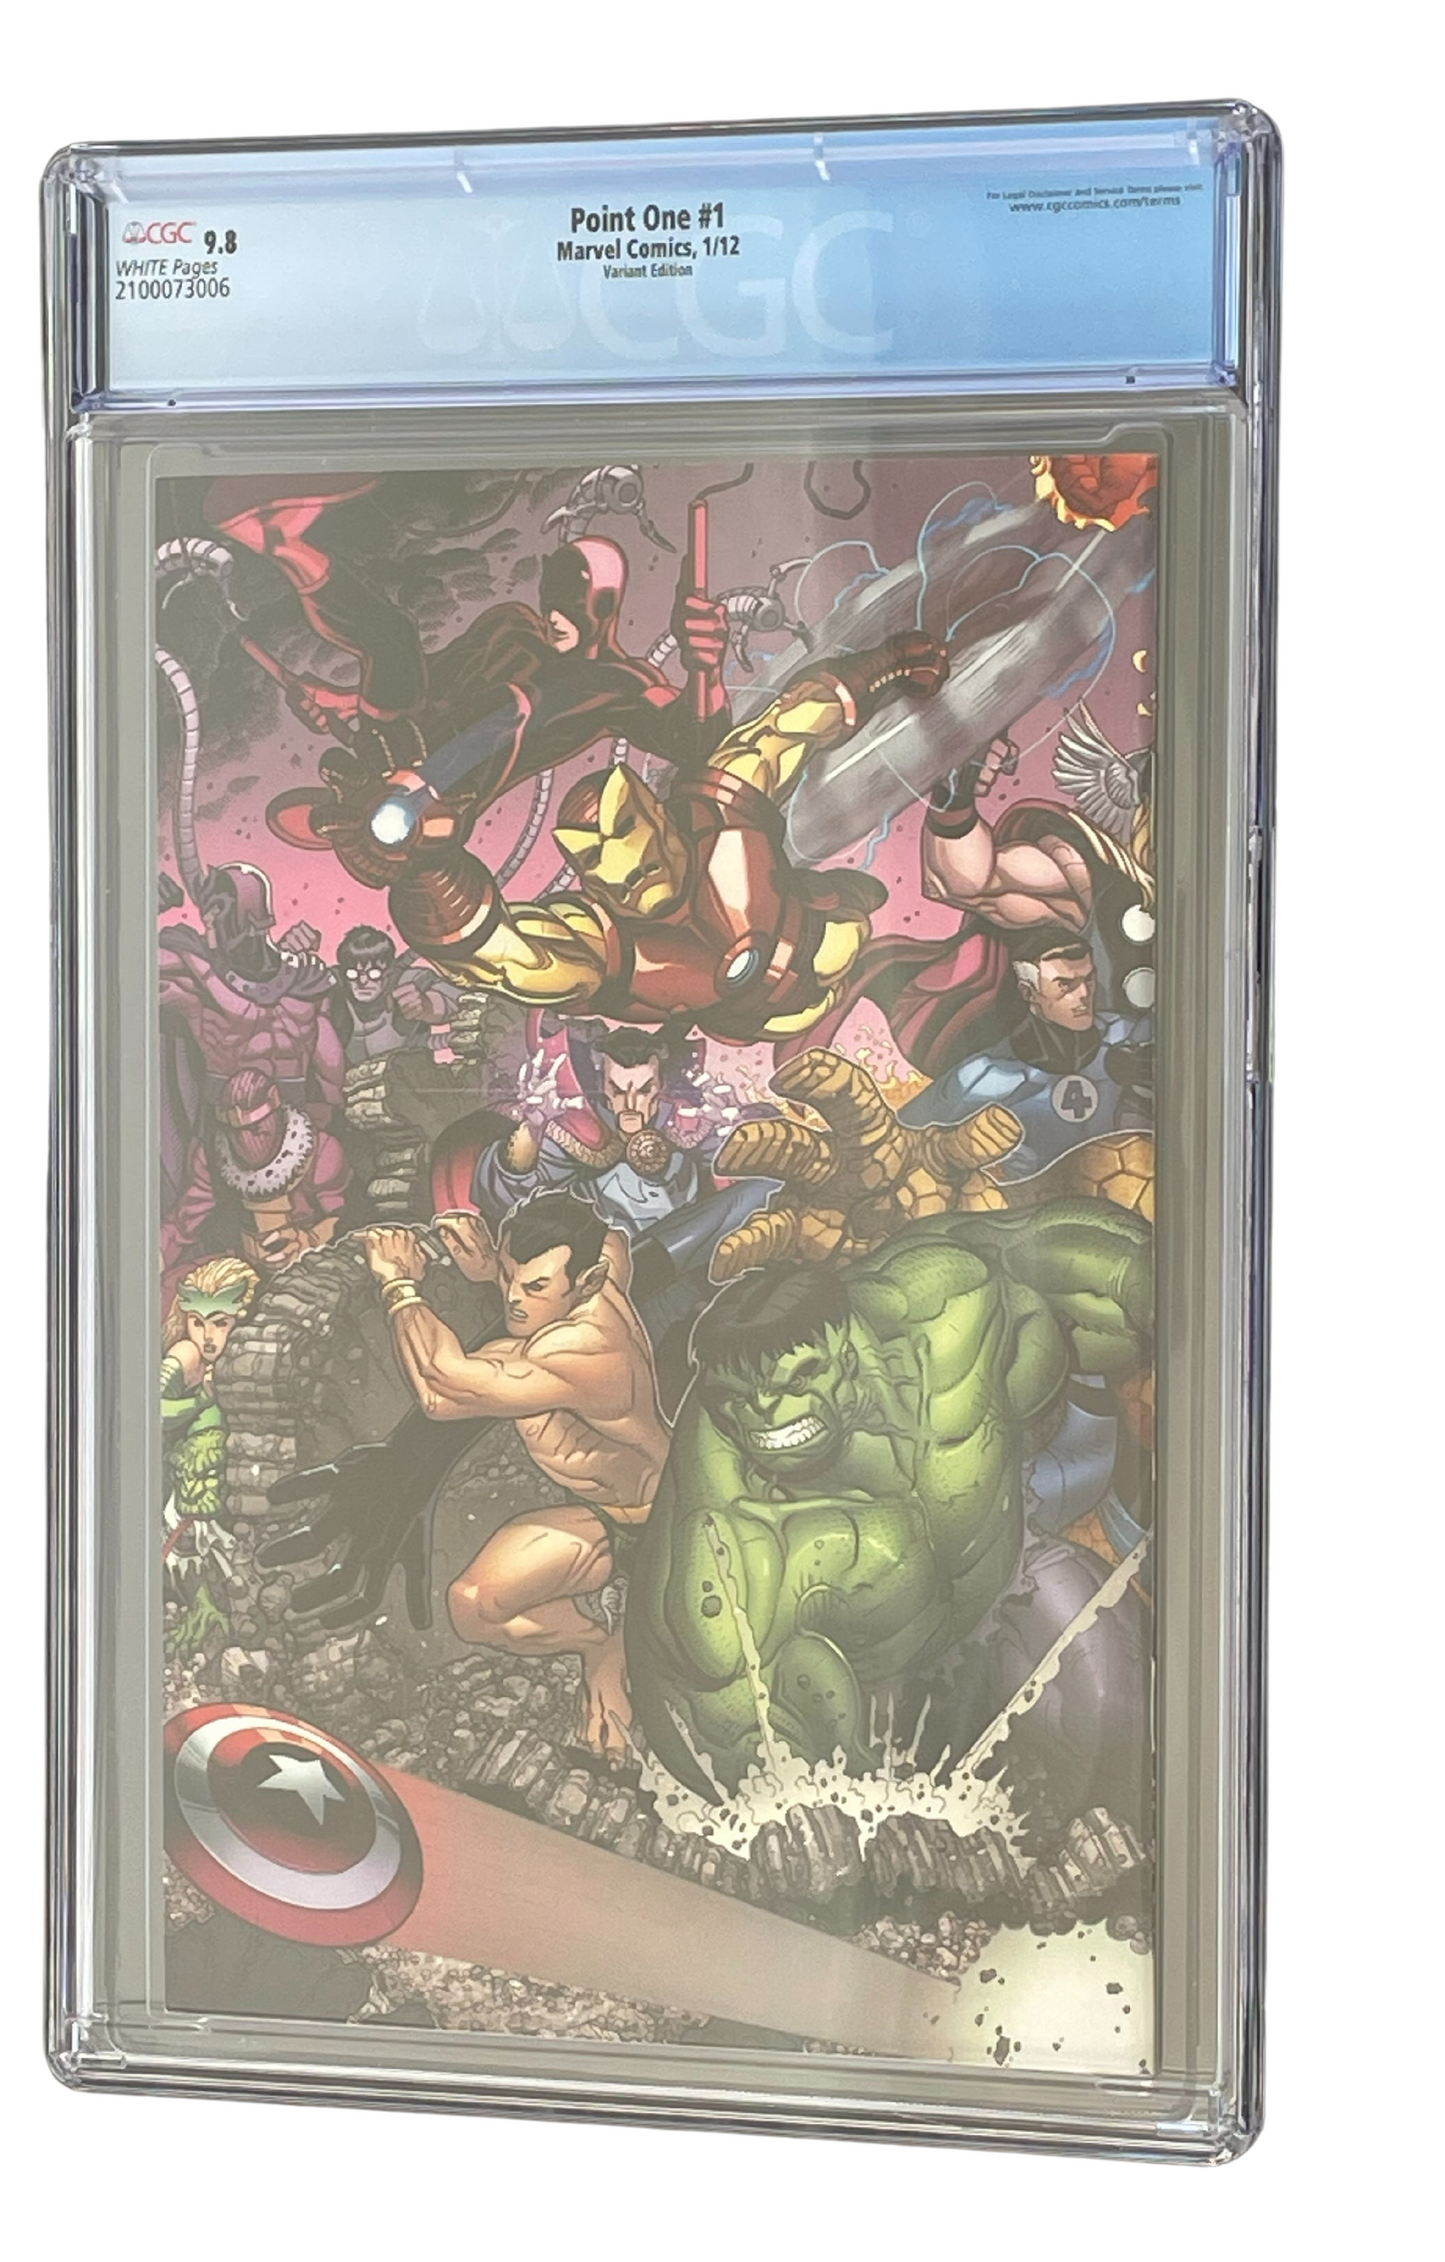 CGC Point One #1 - Variant Edition (9.8)